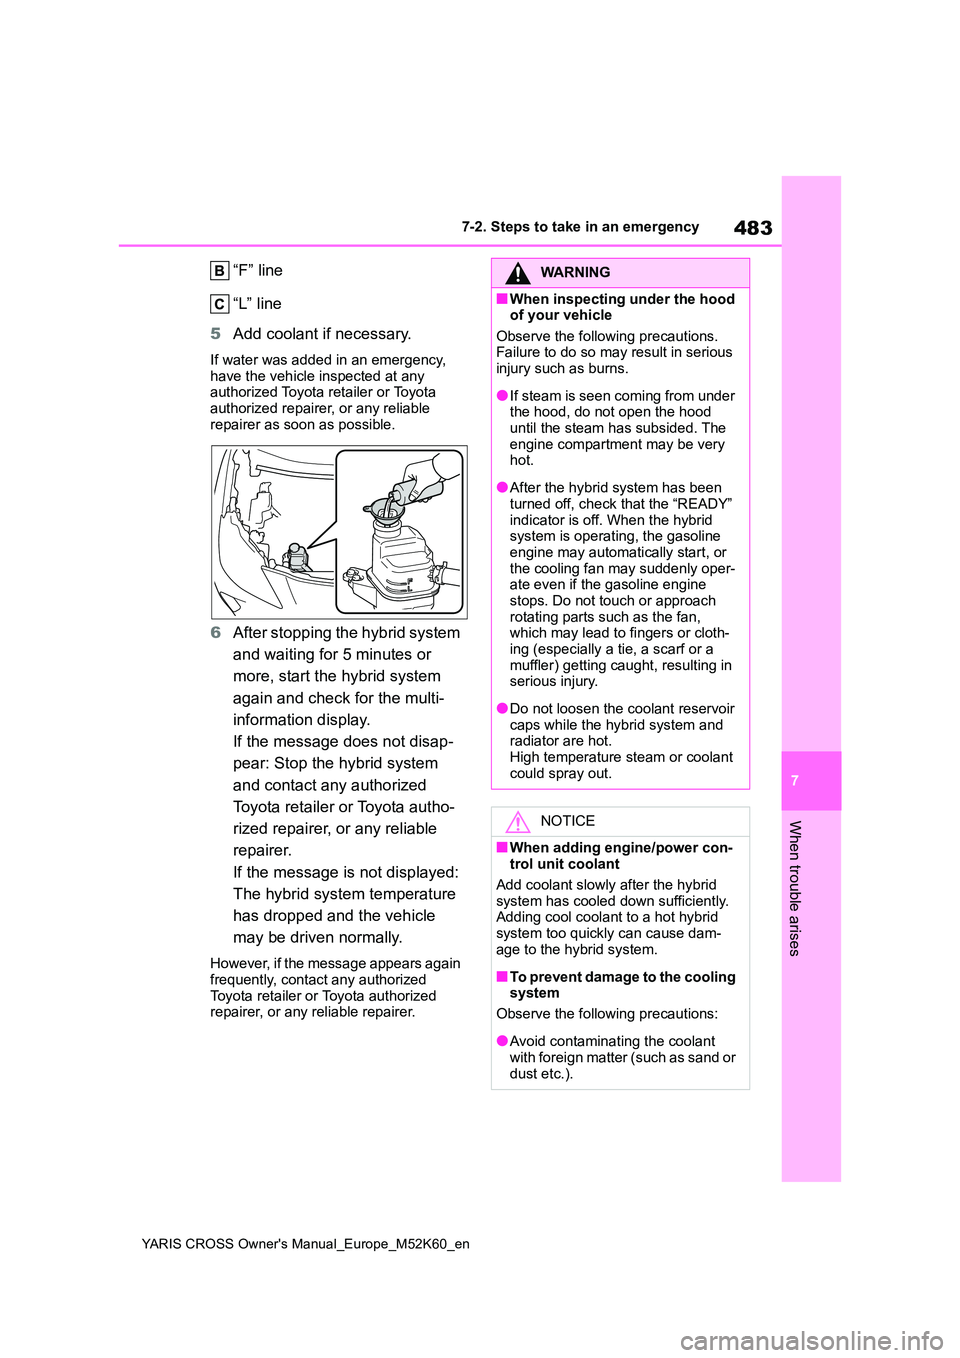 TOYOTA YARIS CROSS 2021  Owners Manual 483
7
YARIS CROSS Owner's Manual_Europe_M52K60_en
7-2. Steps to take in an emergency
When trouble arises
“F” line 
“L” line 
5 Add coolant if necessary.
If water was added in an emergency,